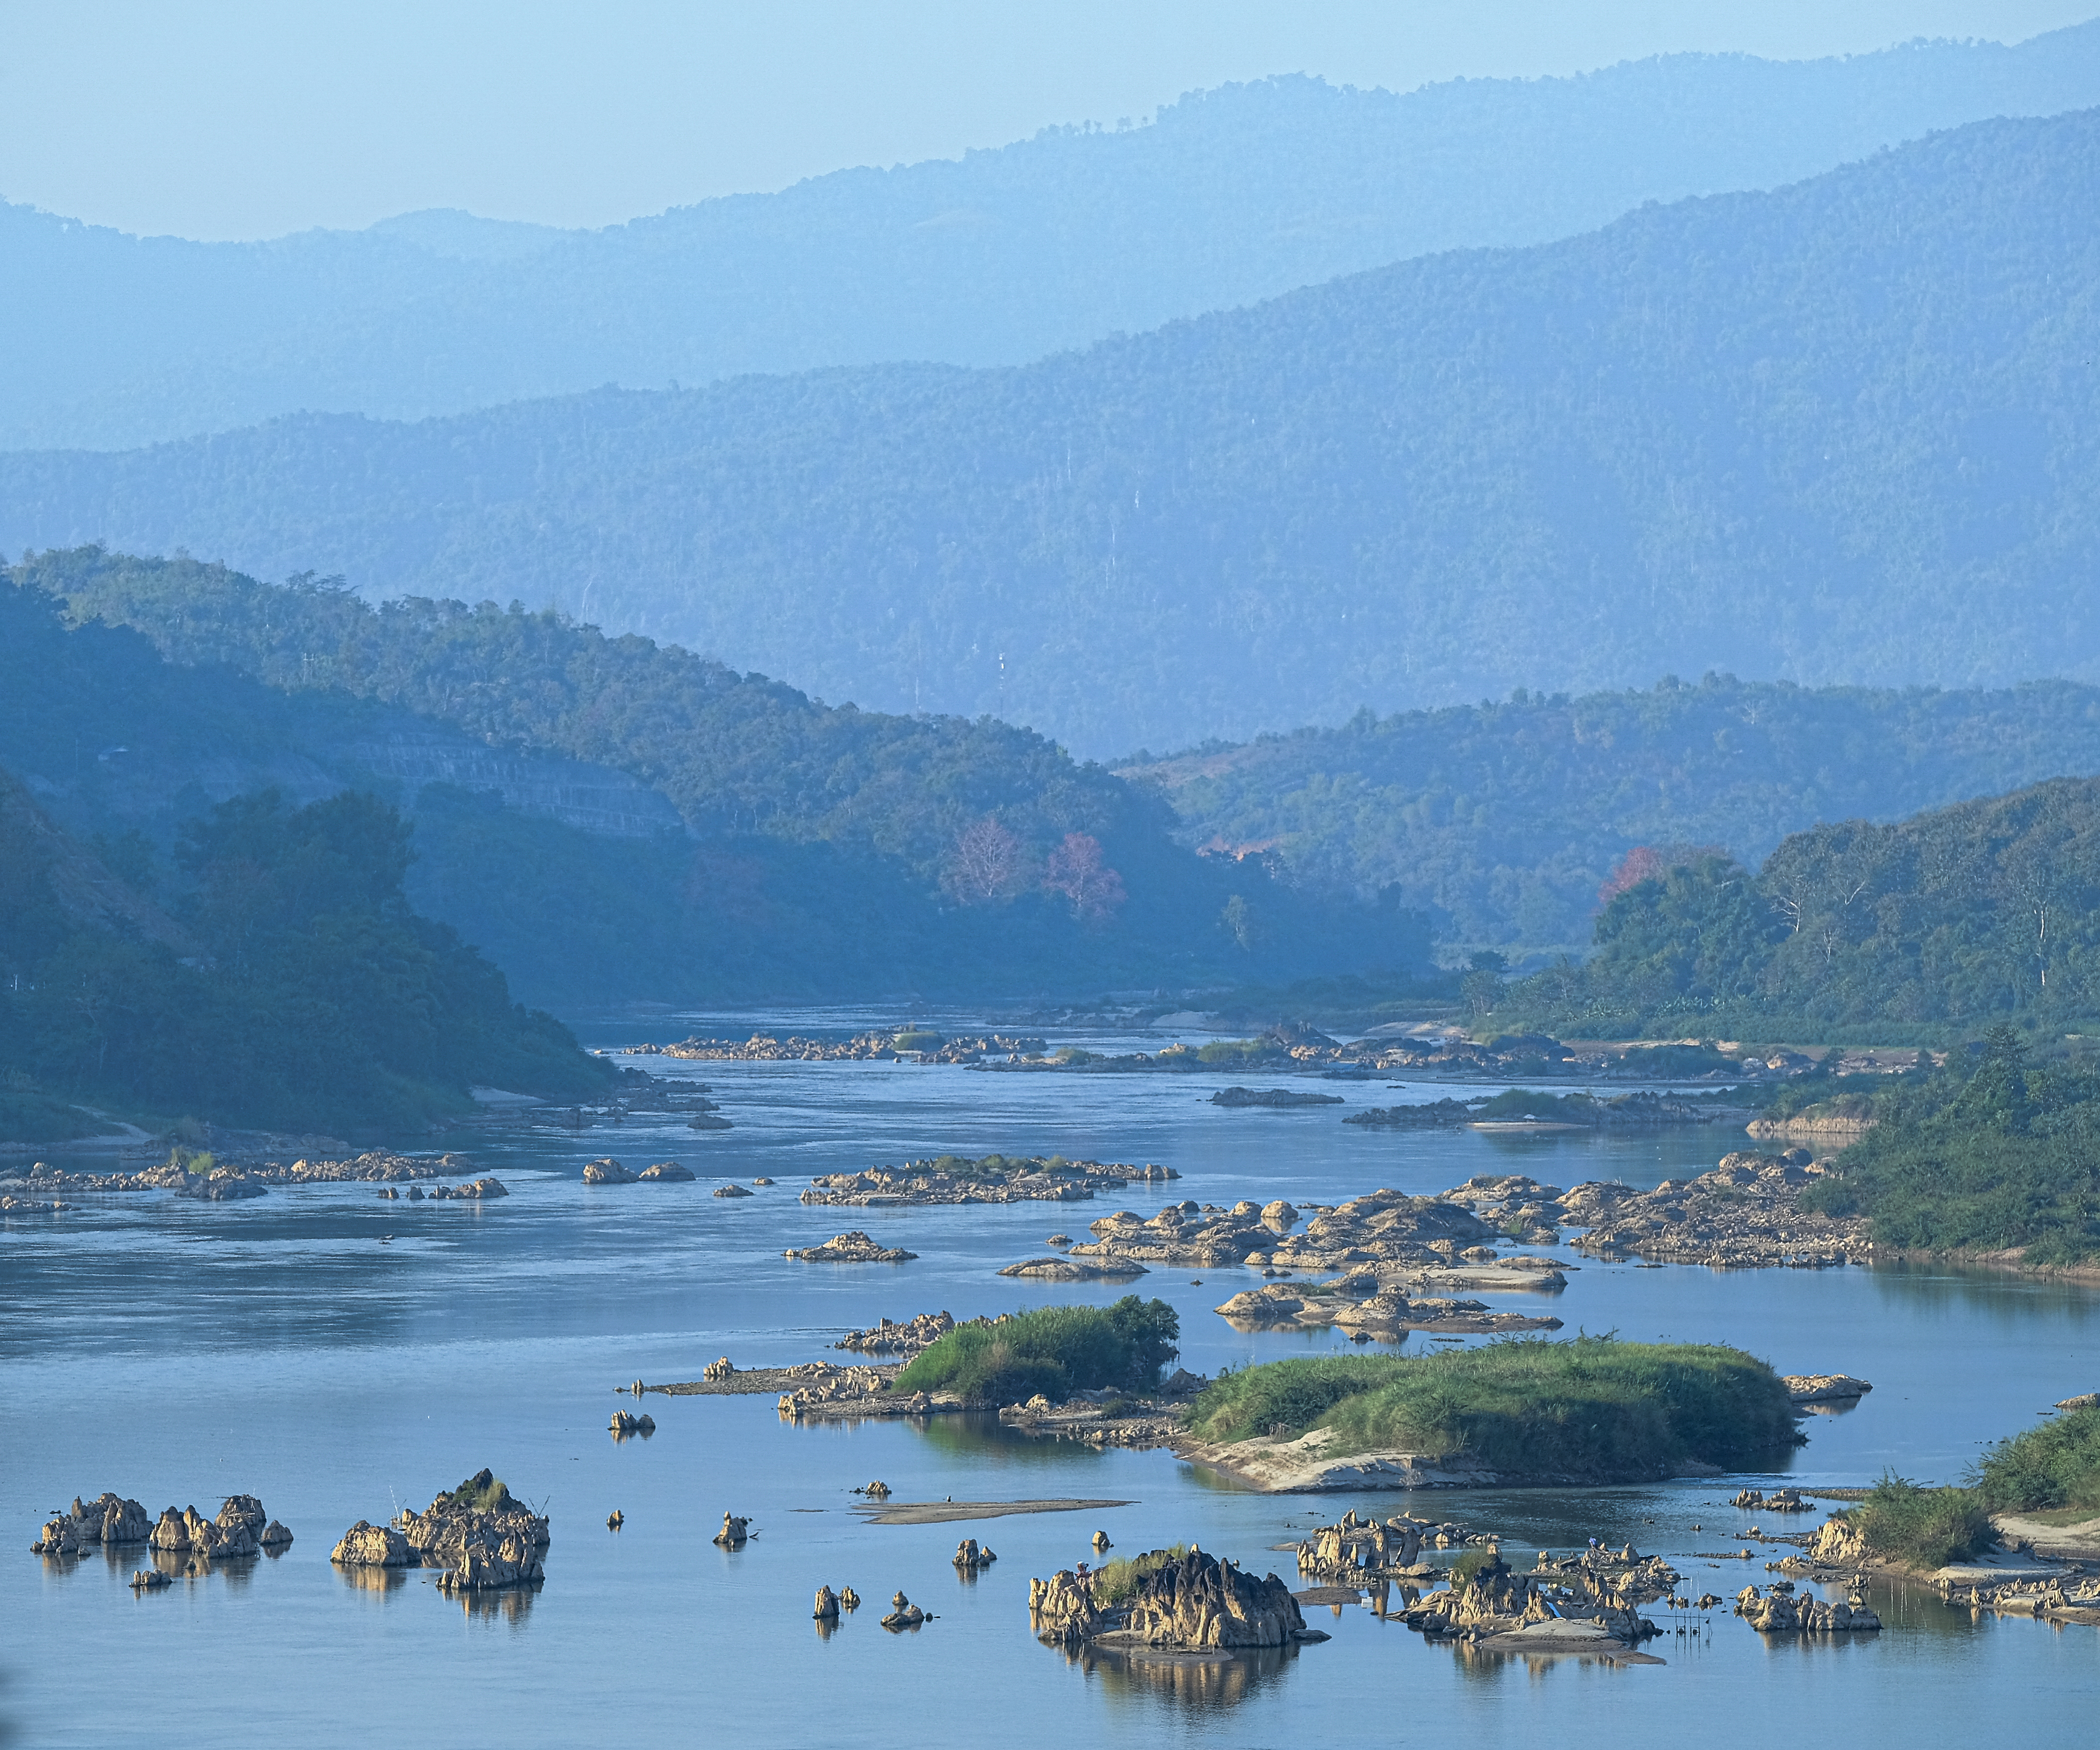 Mekong River with small grassy islands dispersed throughout the river with mountainous hills in background.